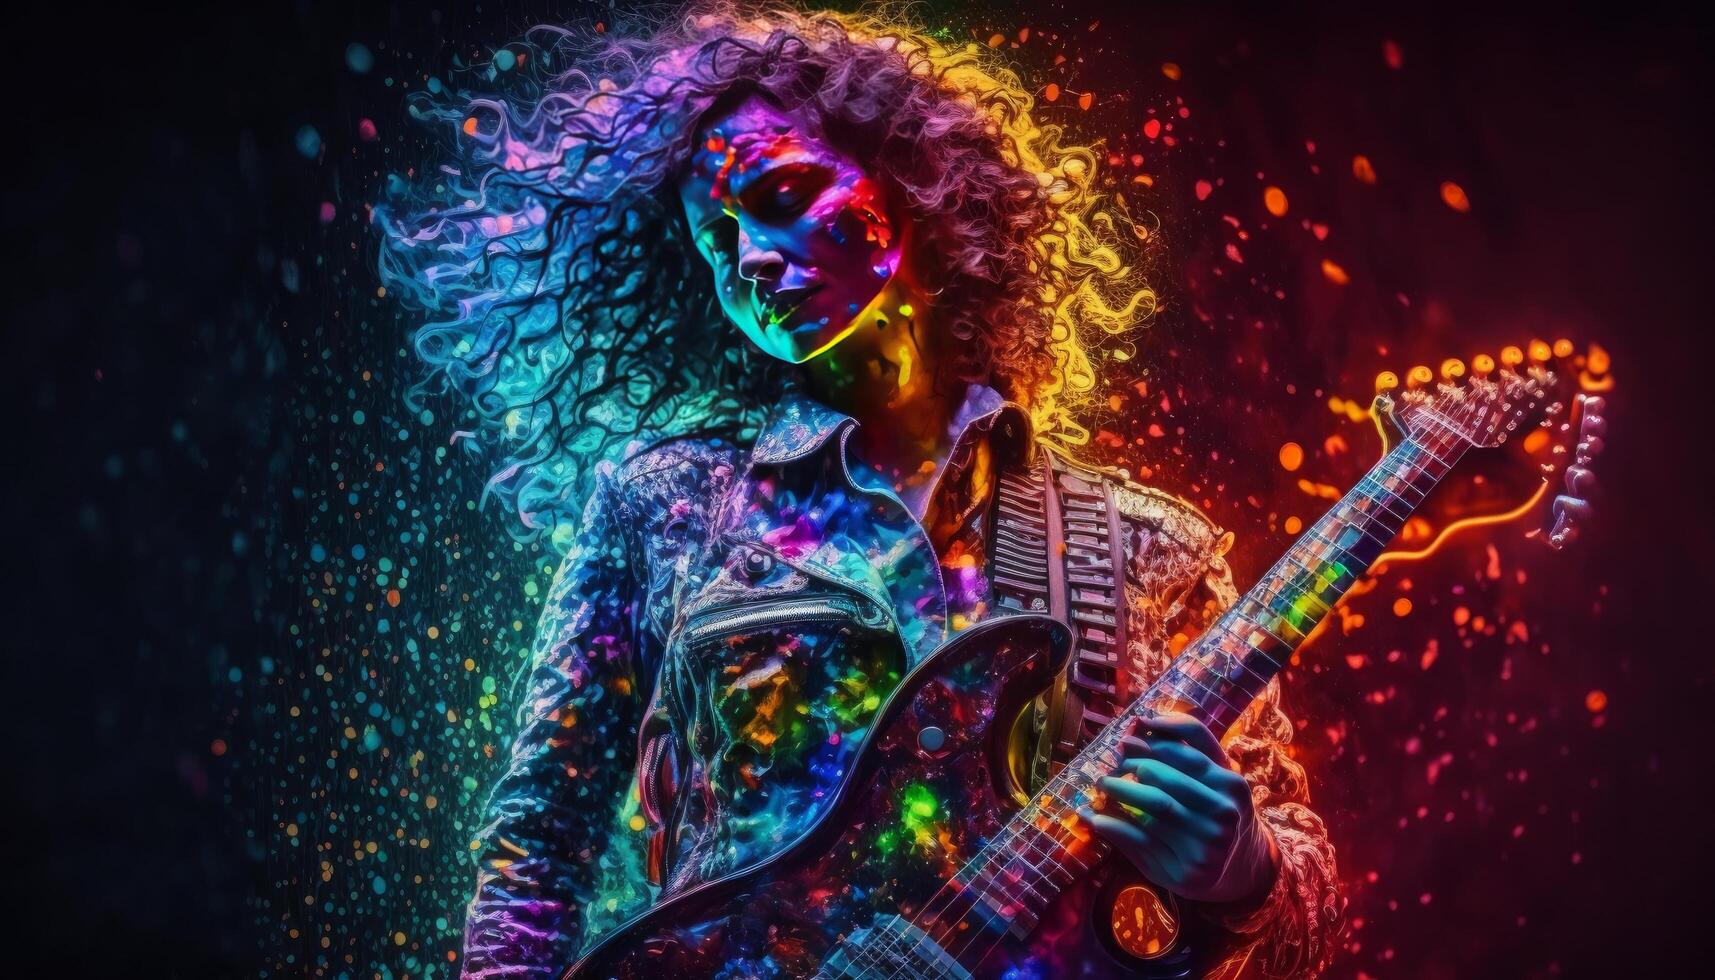 A woman playing a guitar colorful glitter spark image photo